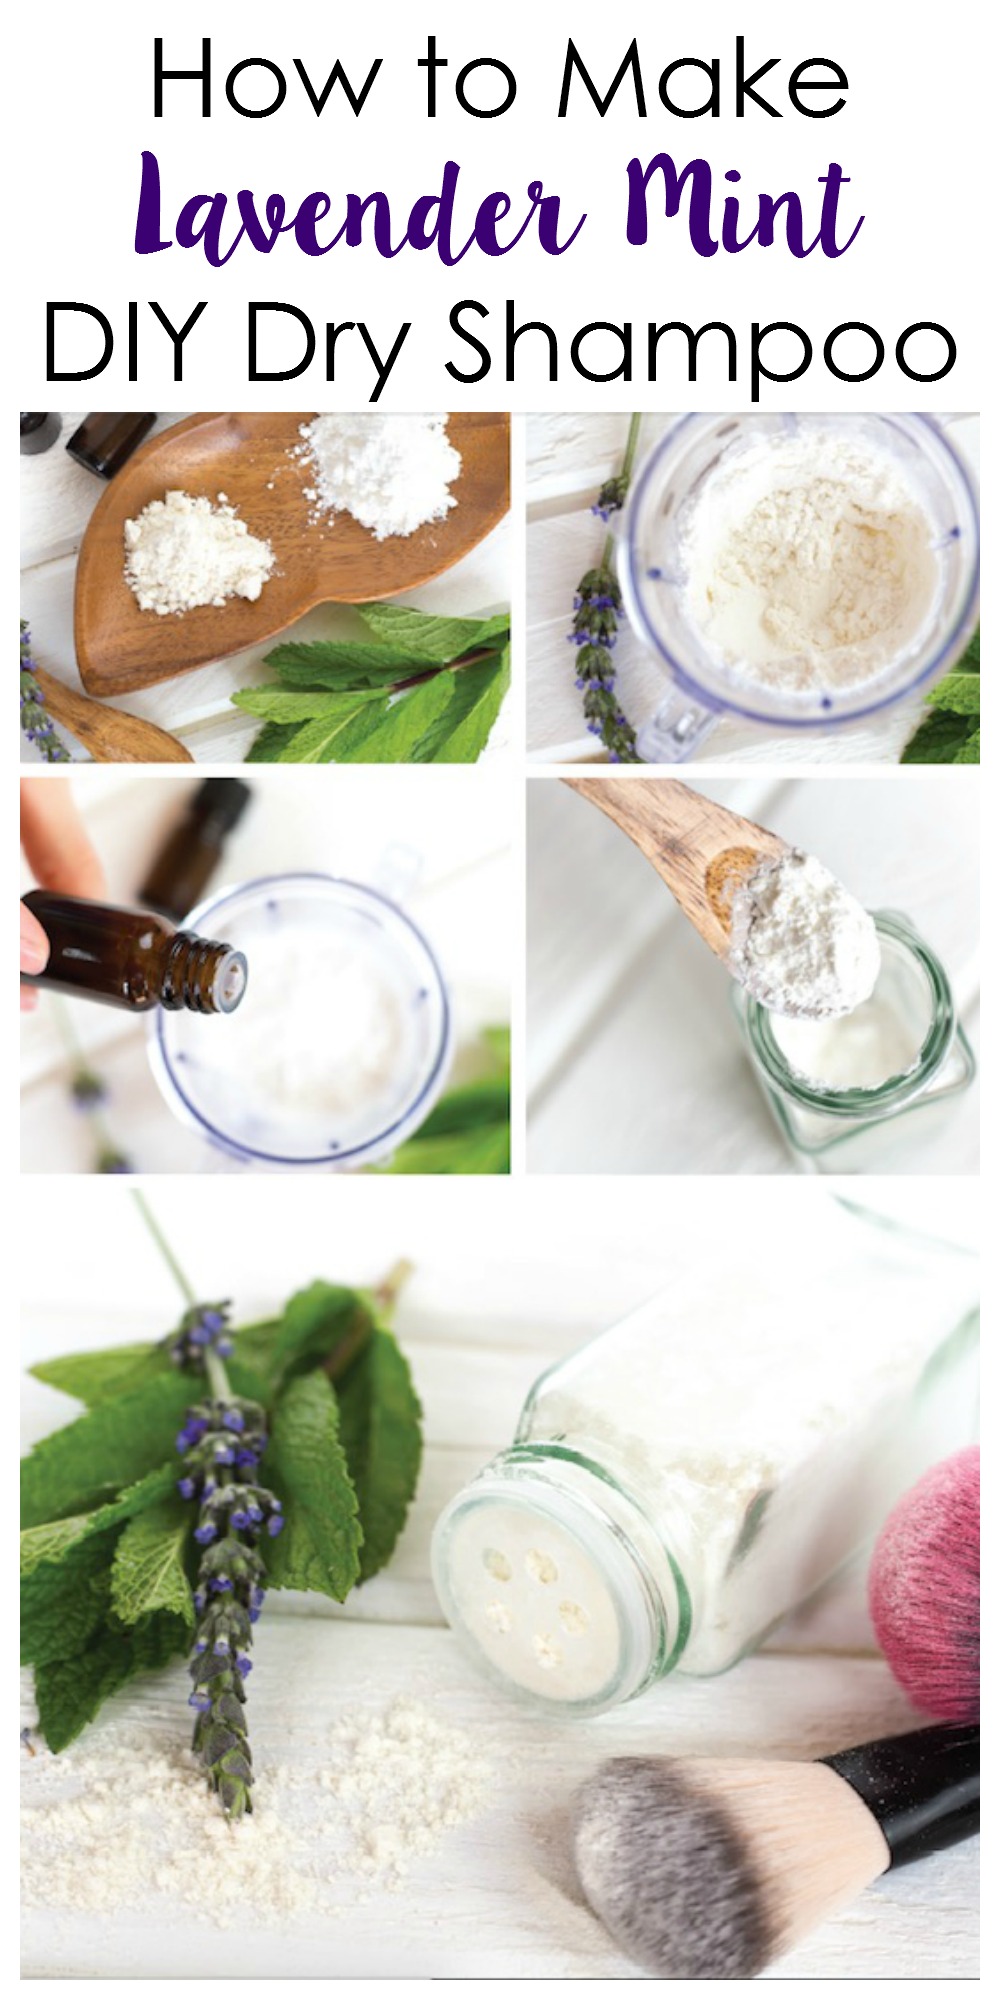 Make your own DIY Dry shampoo quickly and easily.